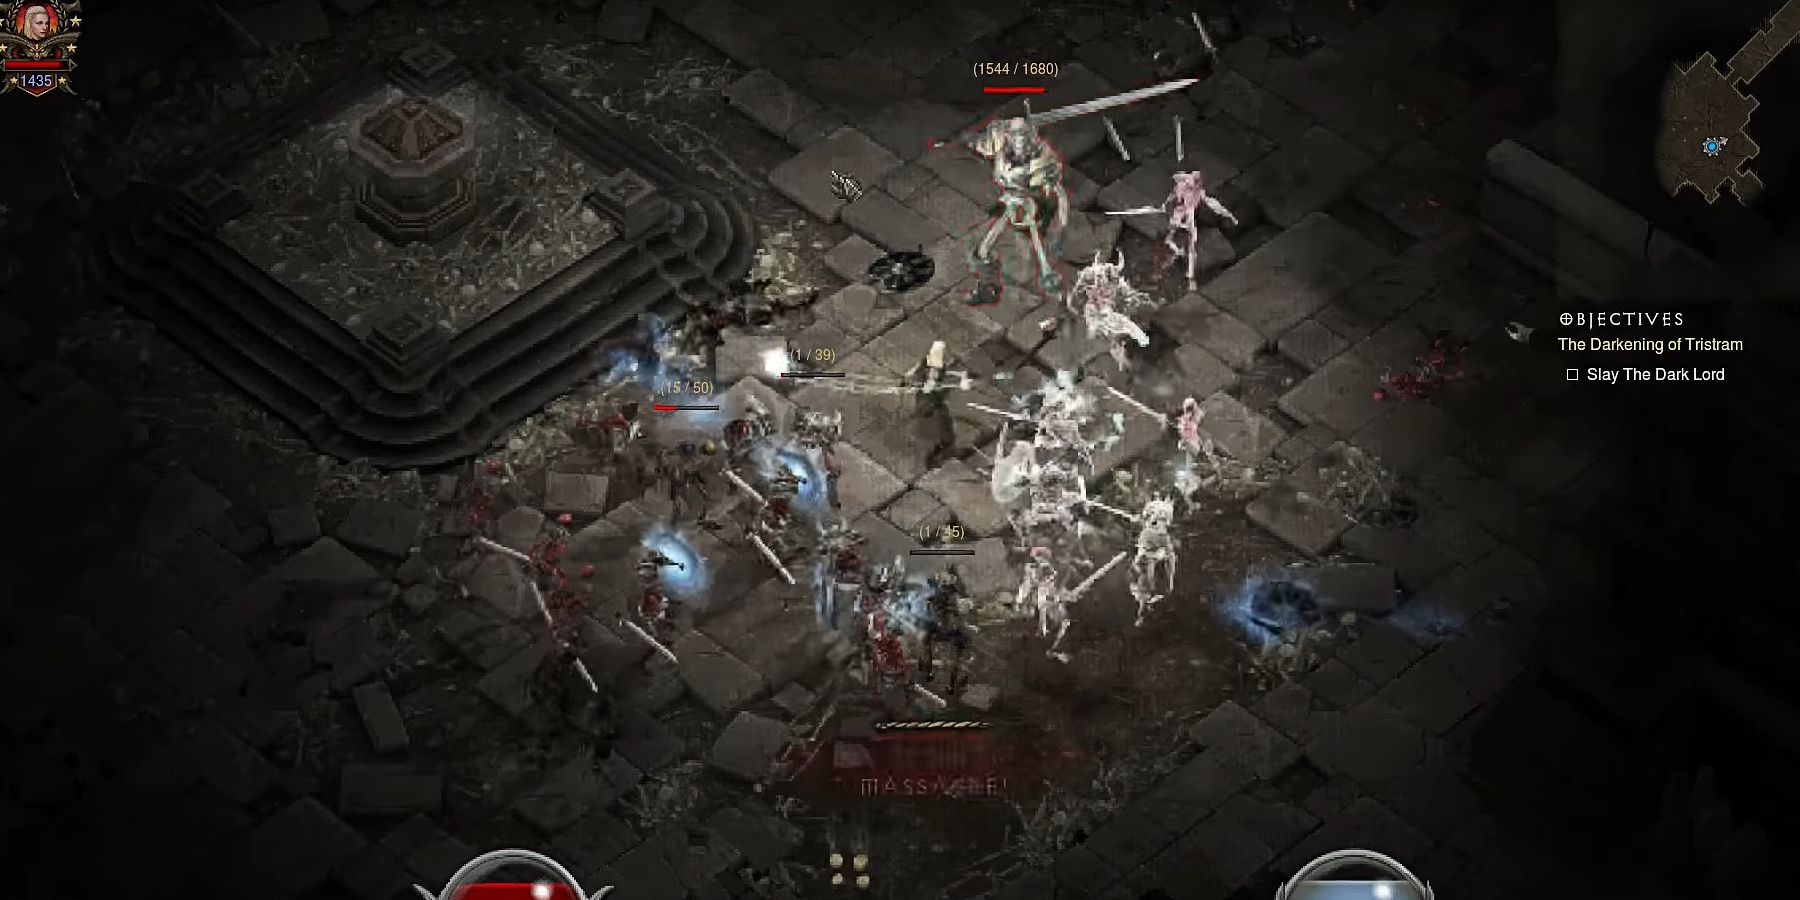 The Sekeleton King in Diablo 3, the player is surrounded by hordes of skeletons while the Skeleton King is about to be struck by the players attack